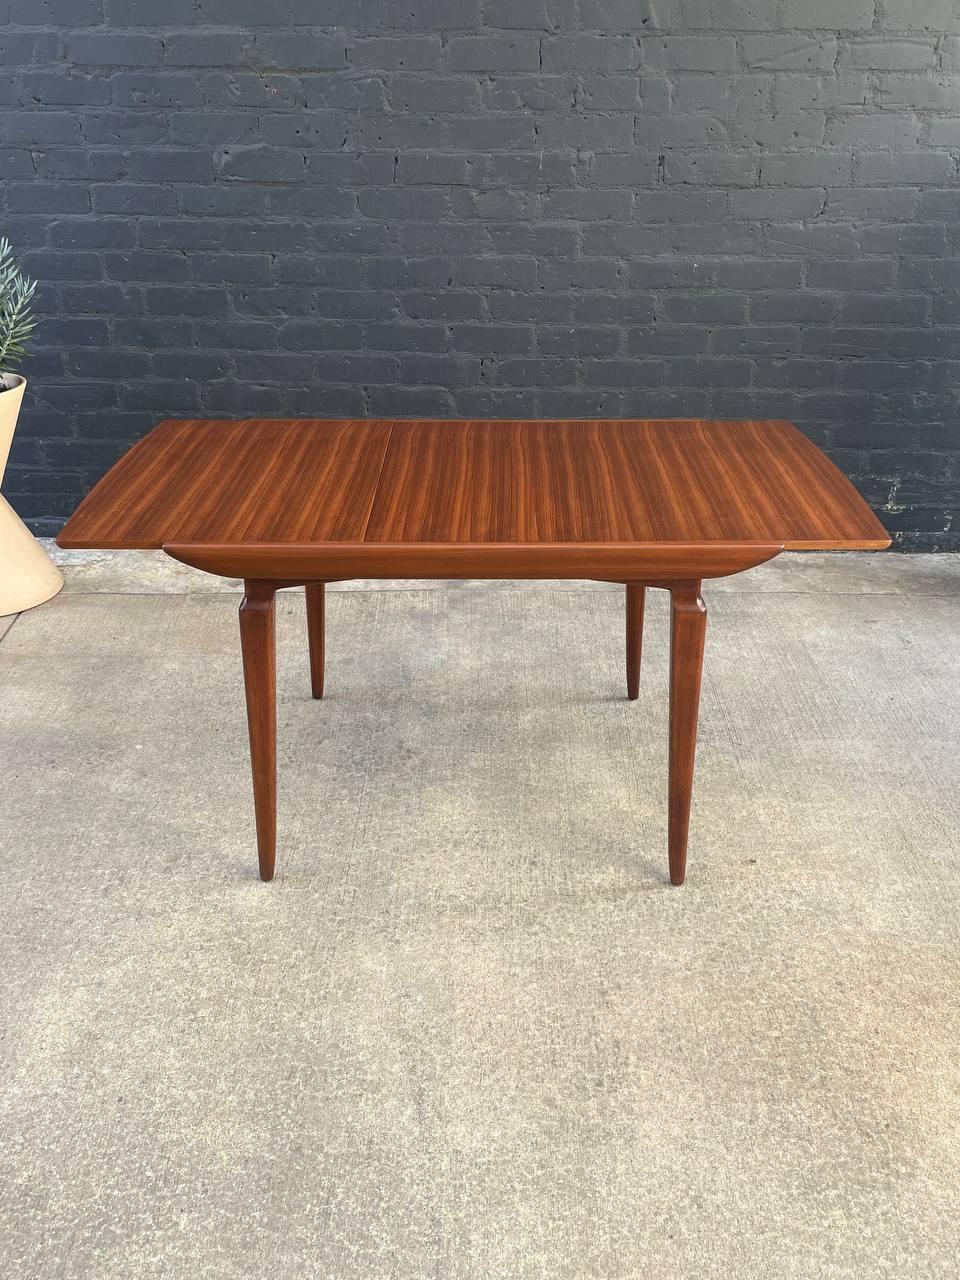 Mid-20th Century Newly Refinished - Mid-Century Modern “Link” Expanding Teak Dining Table For Sale